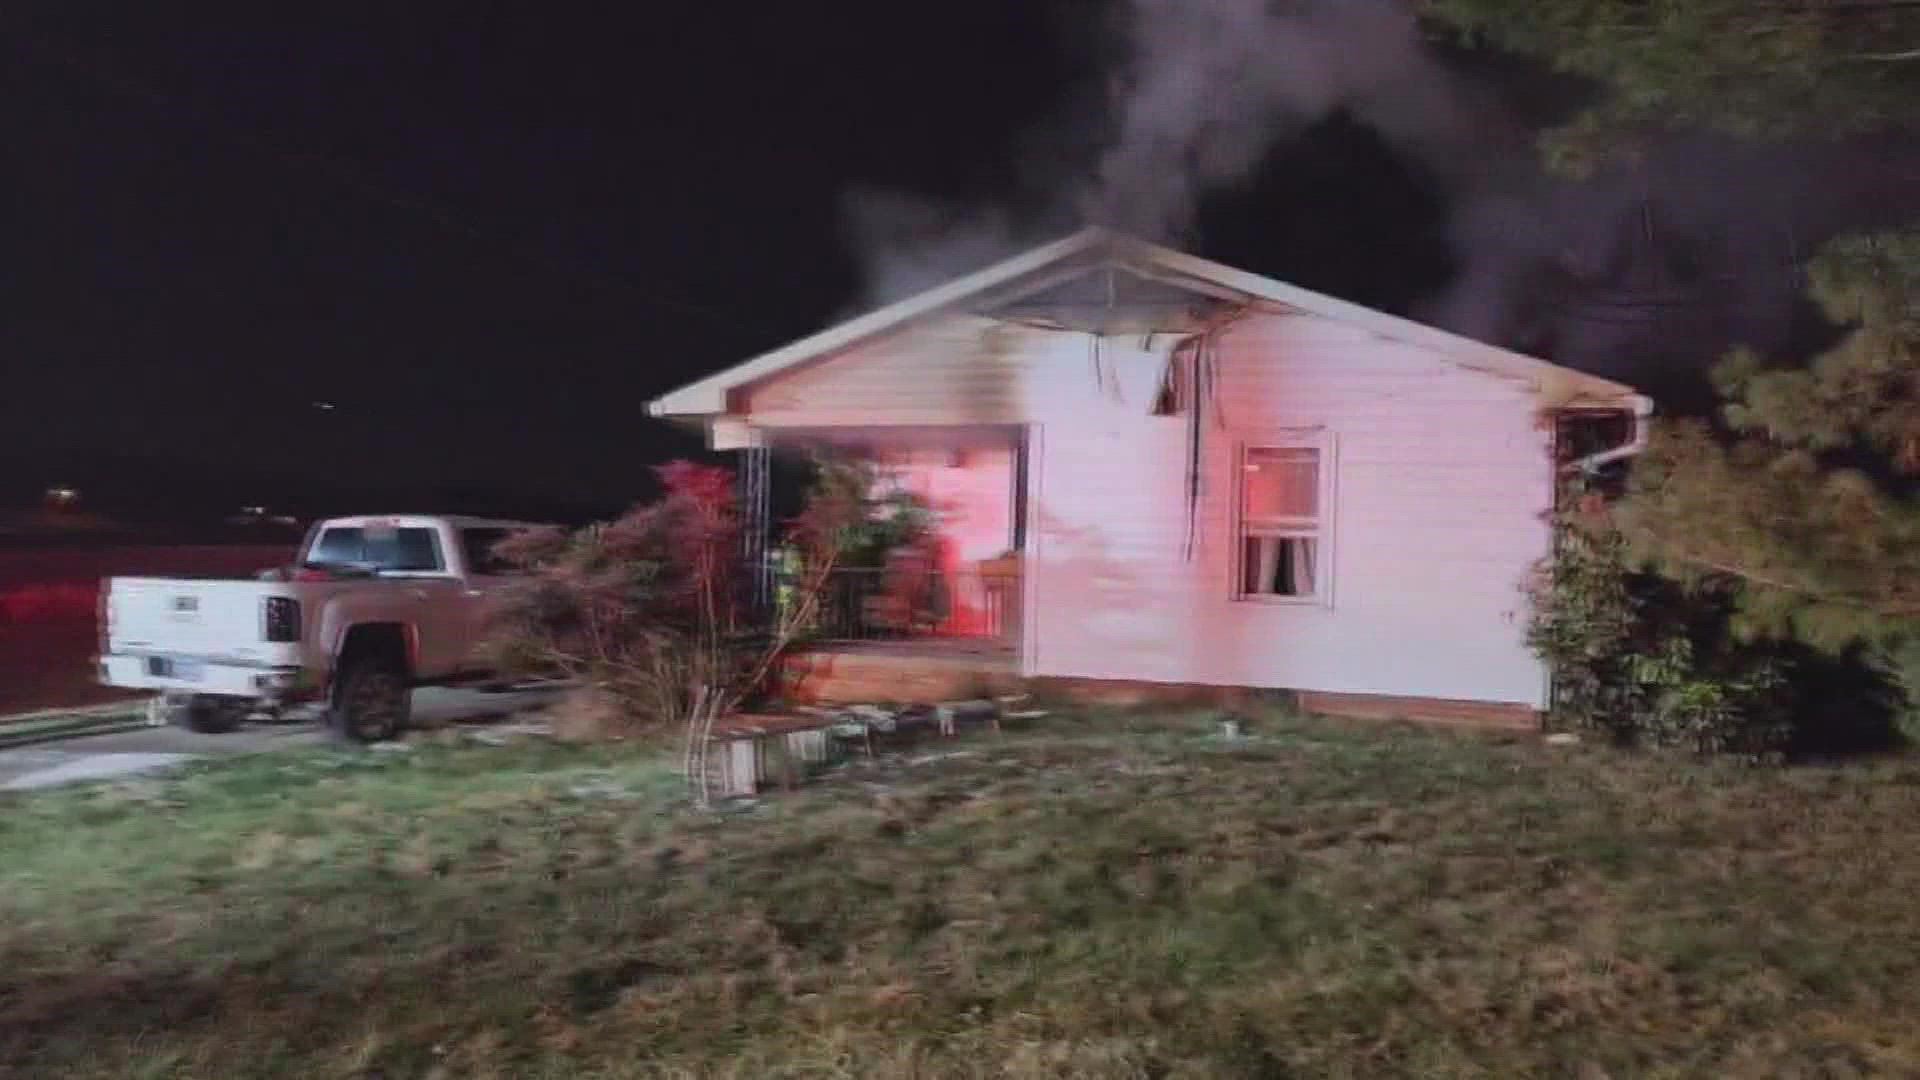 Rural Metro said when crews arrived, they found fire on the back side of the home with smoke coming out of it.